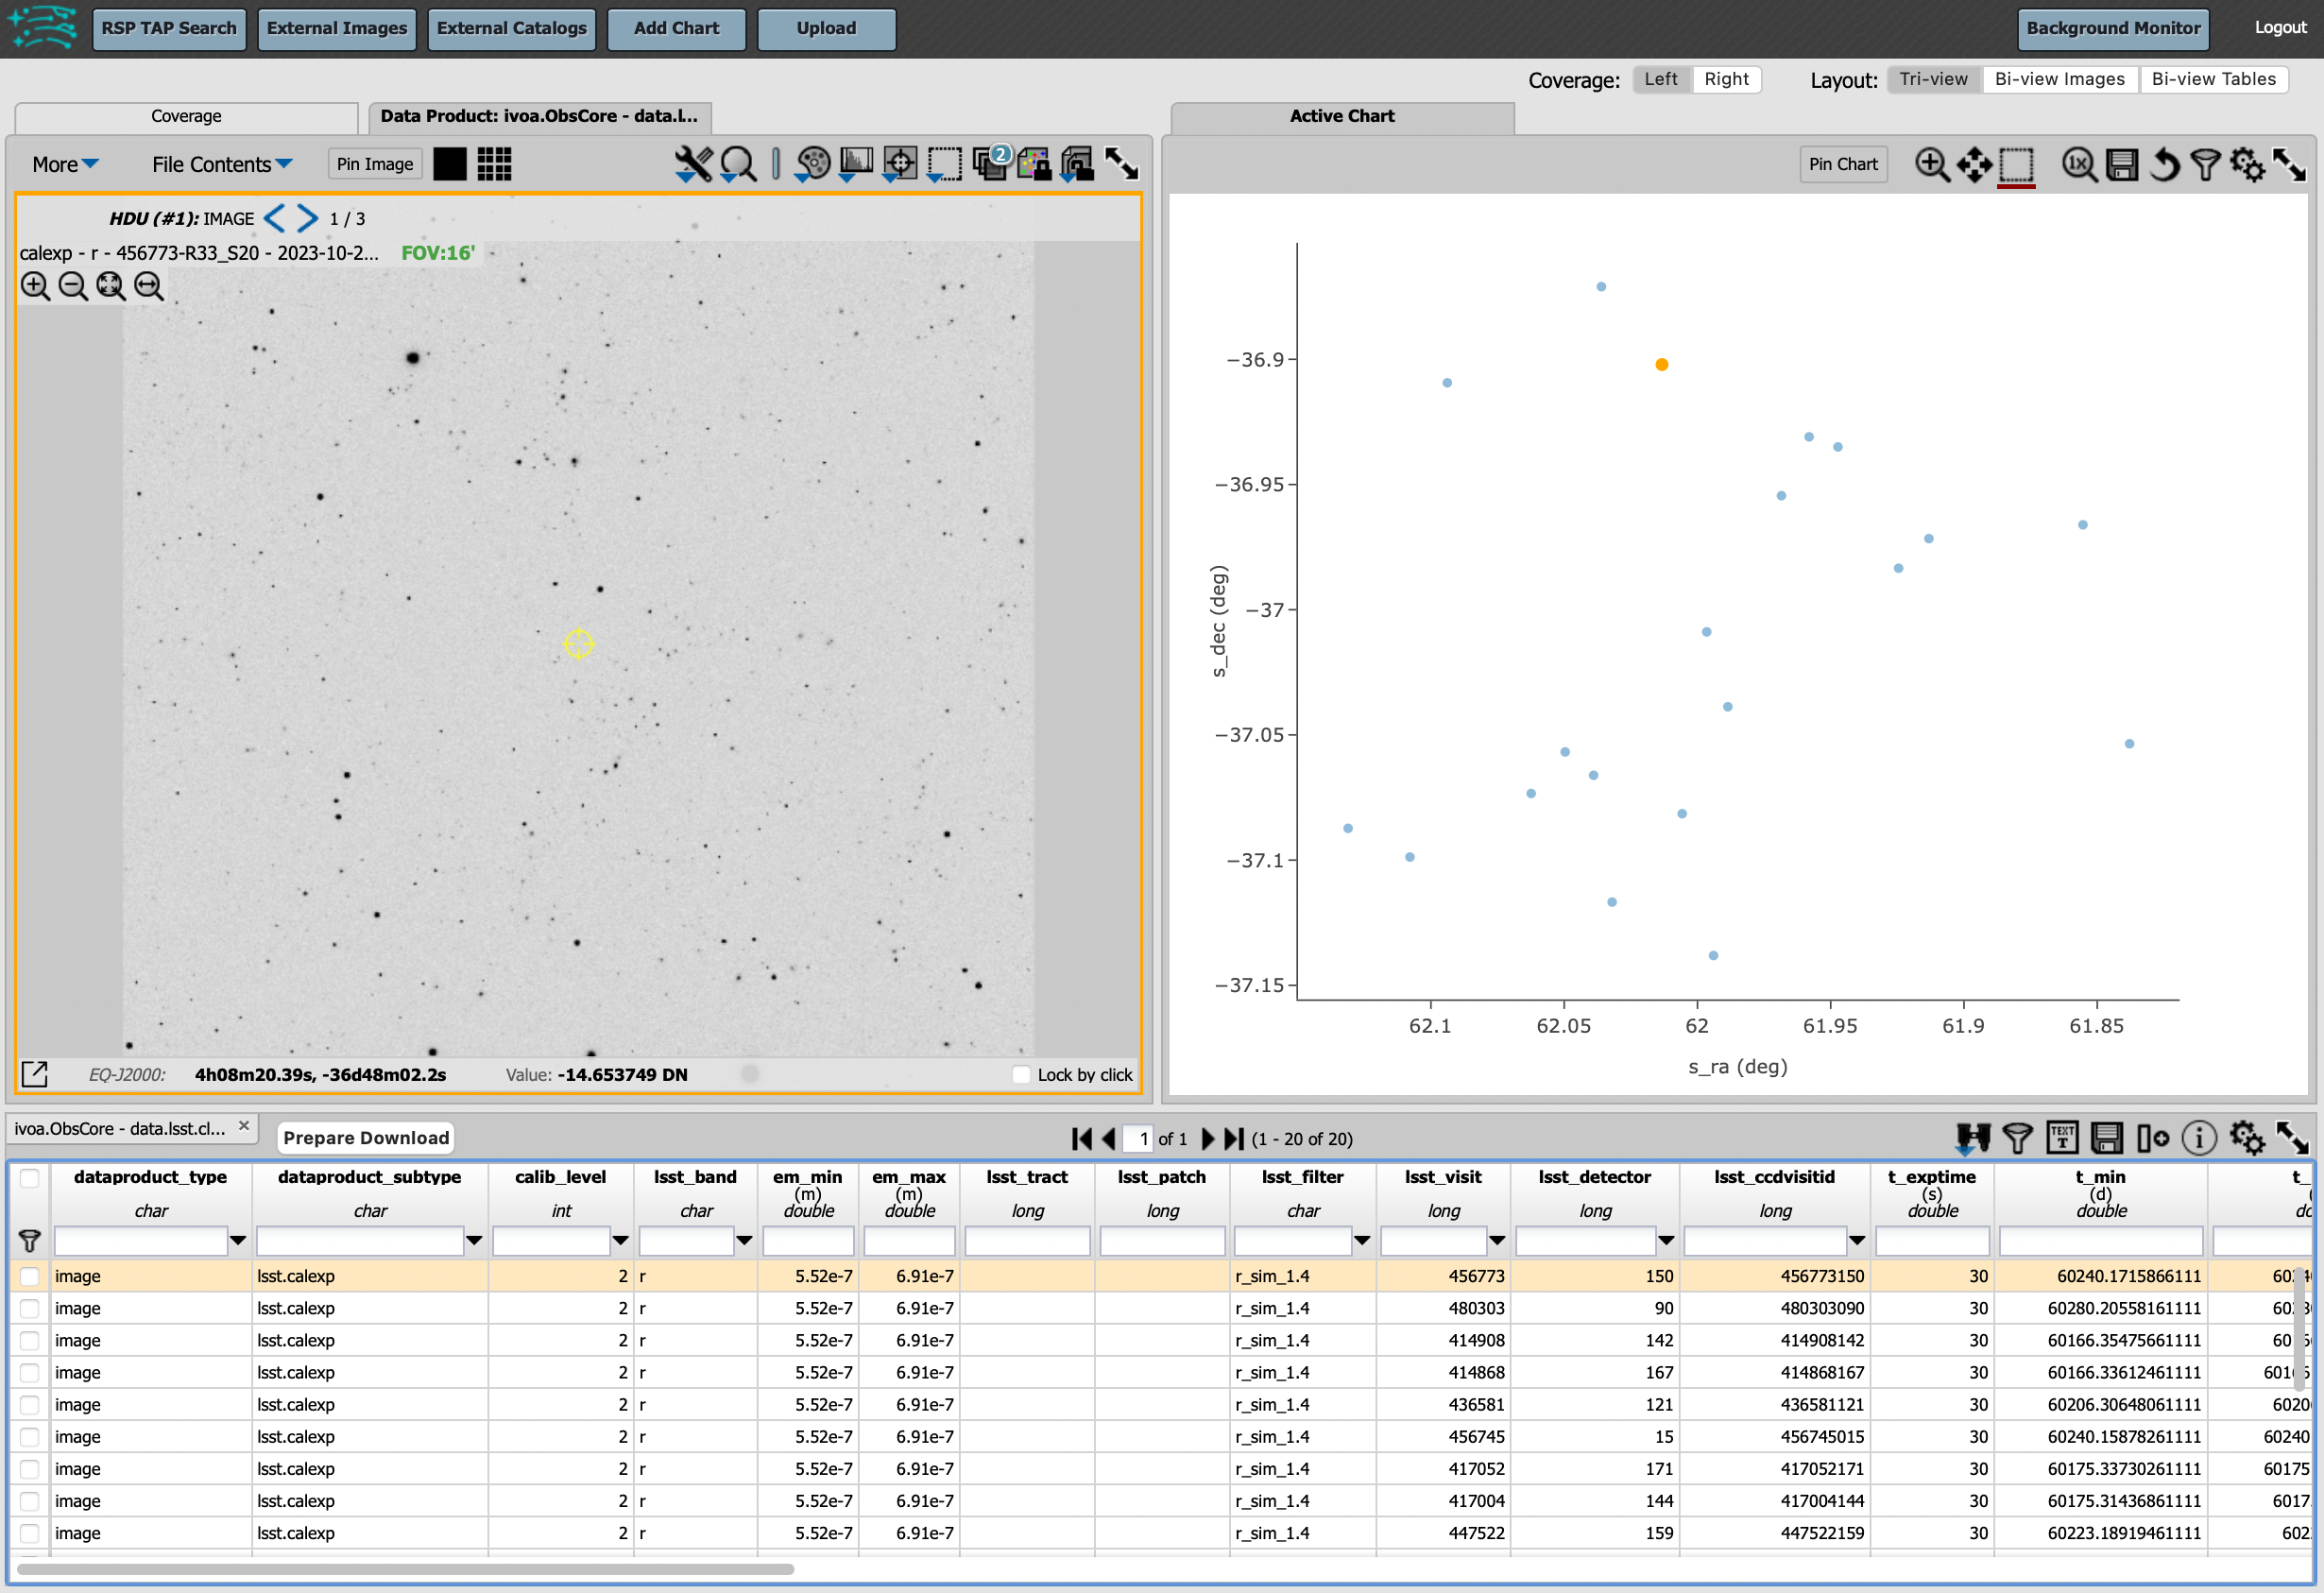 A screenshot of the results view from submitting the query described above.  The upper left image is an image of the sky.  The upper right image shows the cartesian scatter plot resulting from the query.  The bottom section is the data table resulting from the query.